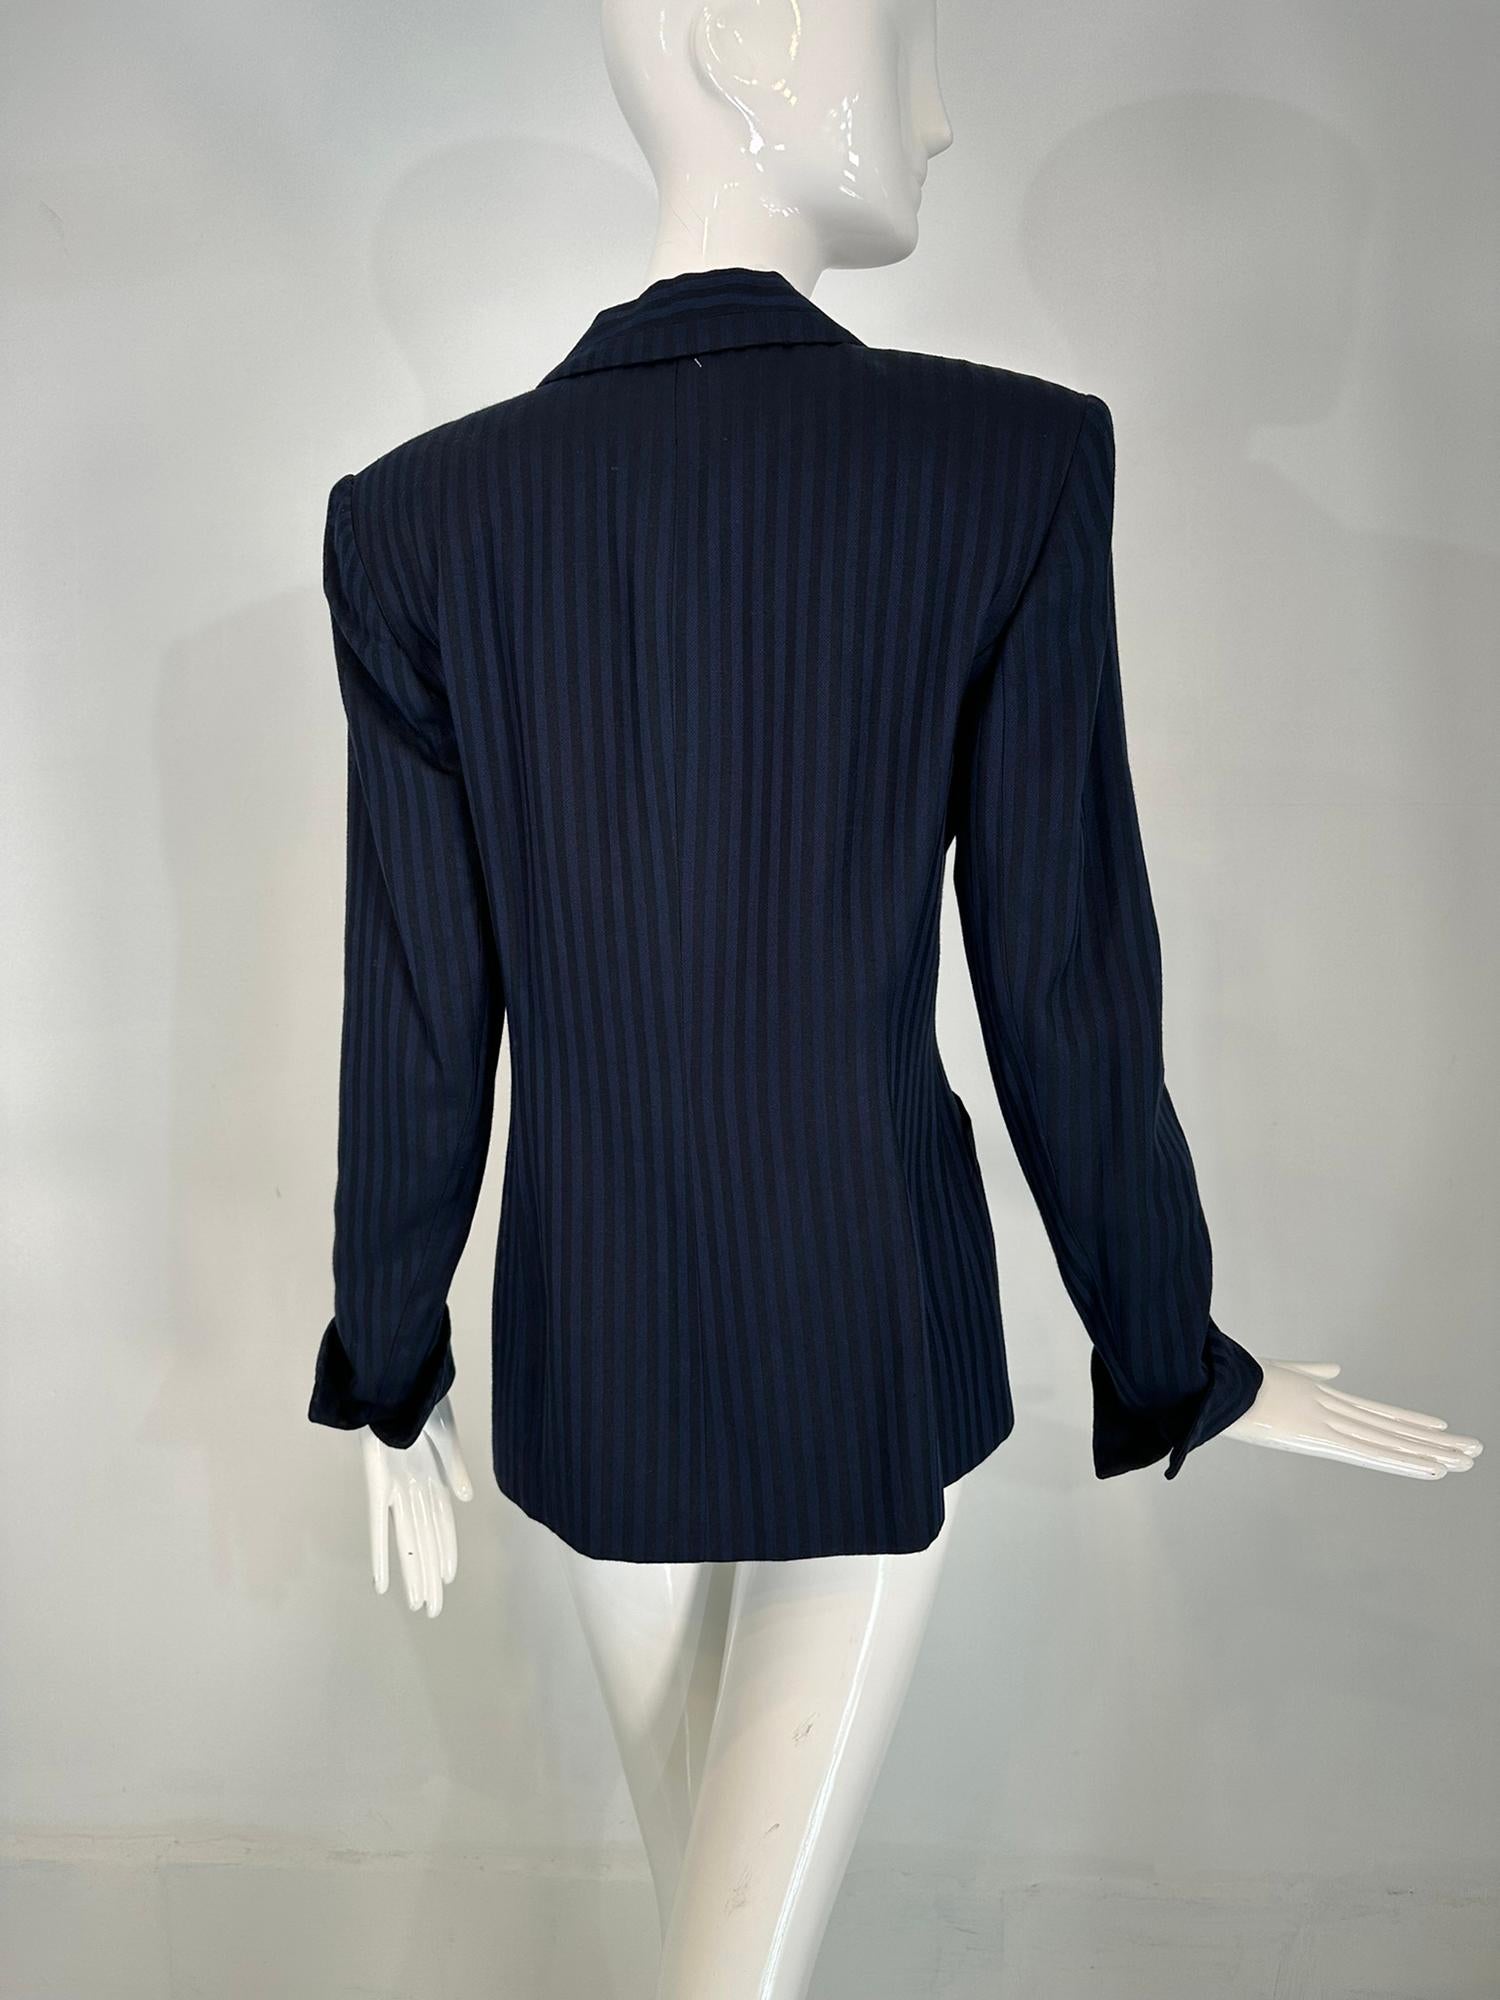 Christian Dior Navy Blue & Black Wide Stripe Wool Twill Jacket Late 90s-2000s 4 For Sale 3